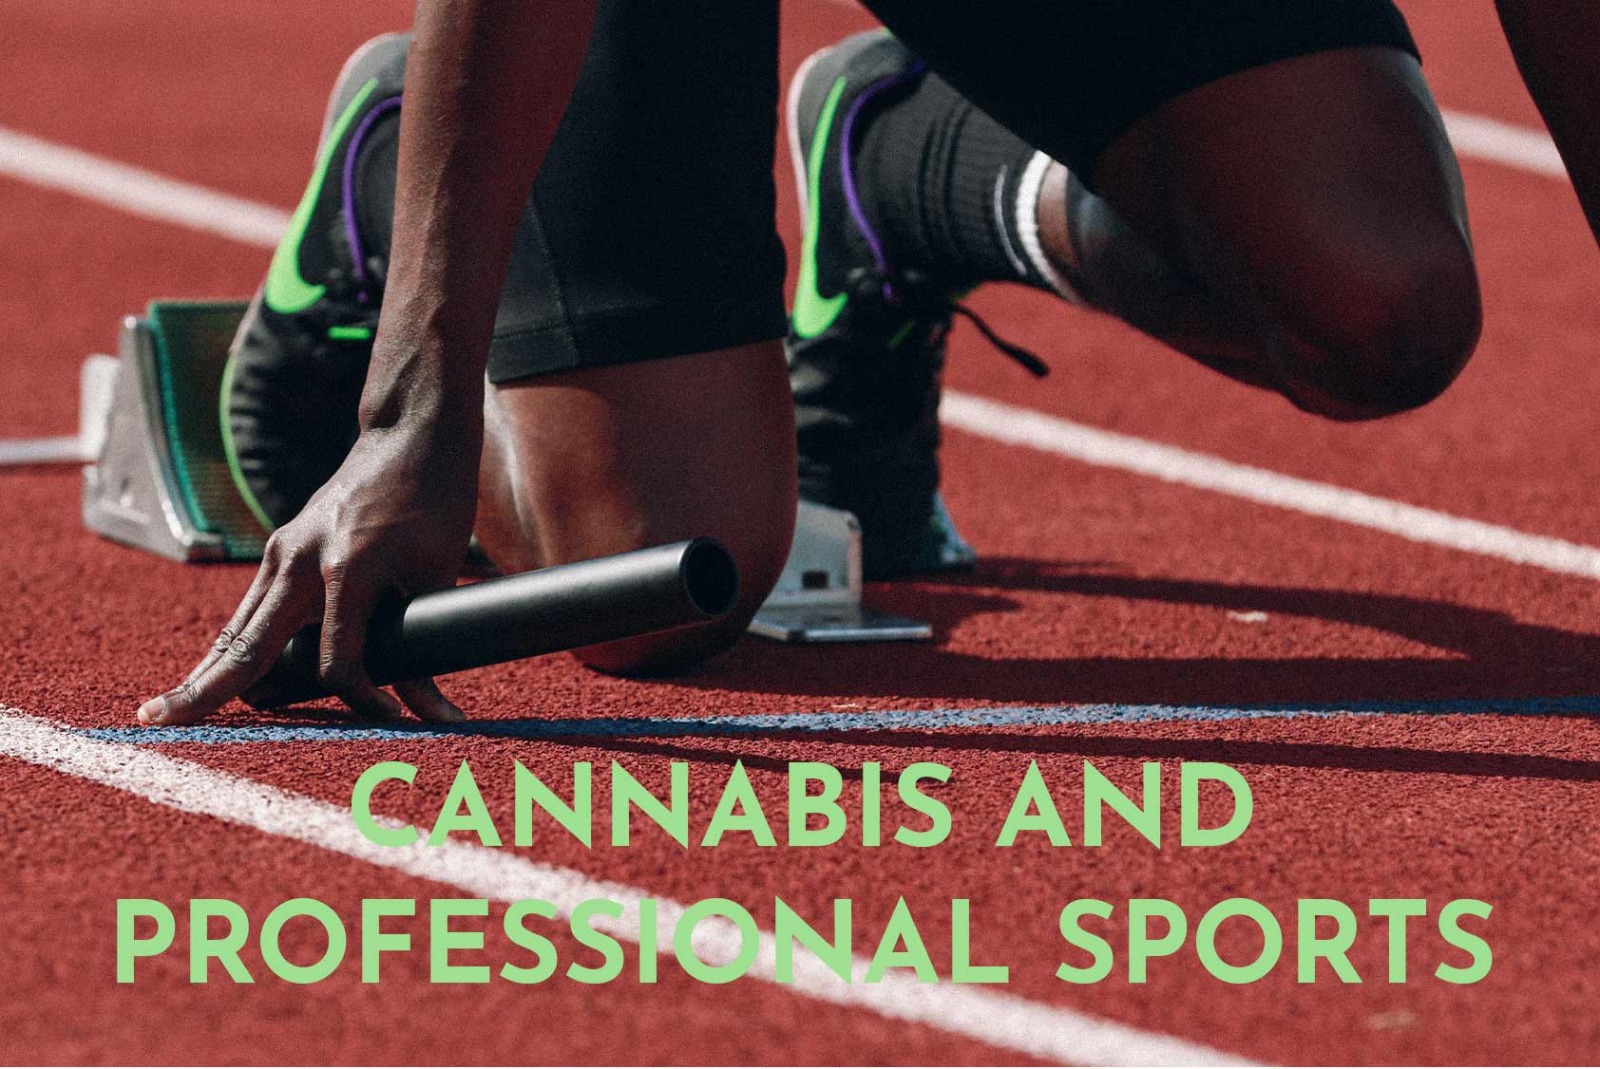 cannabis and professional sports, track runner race